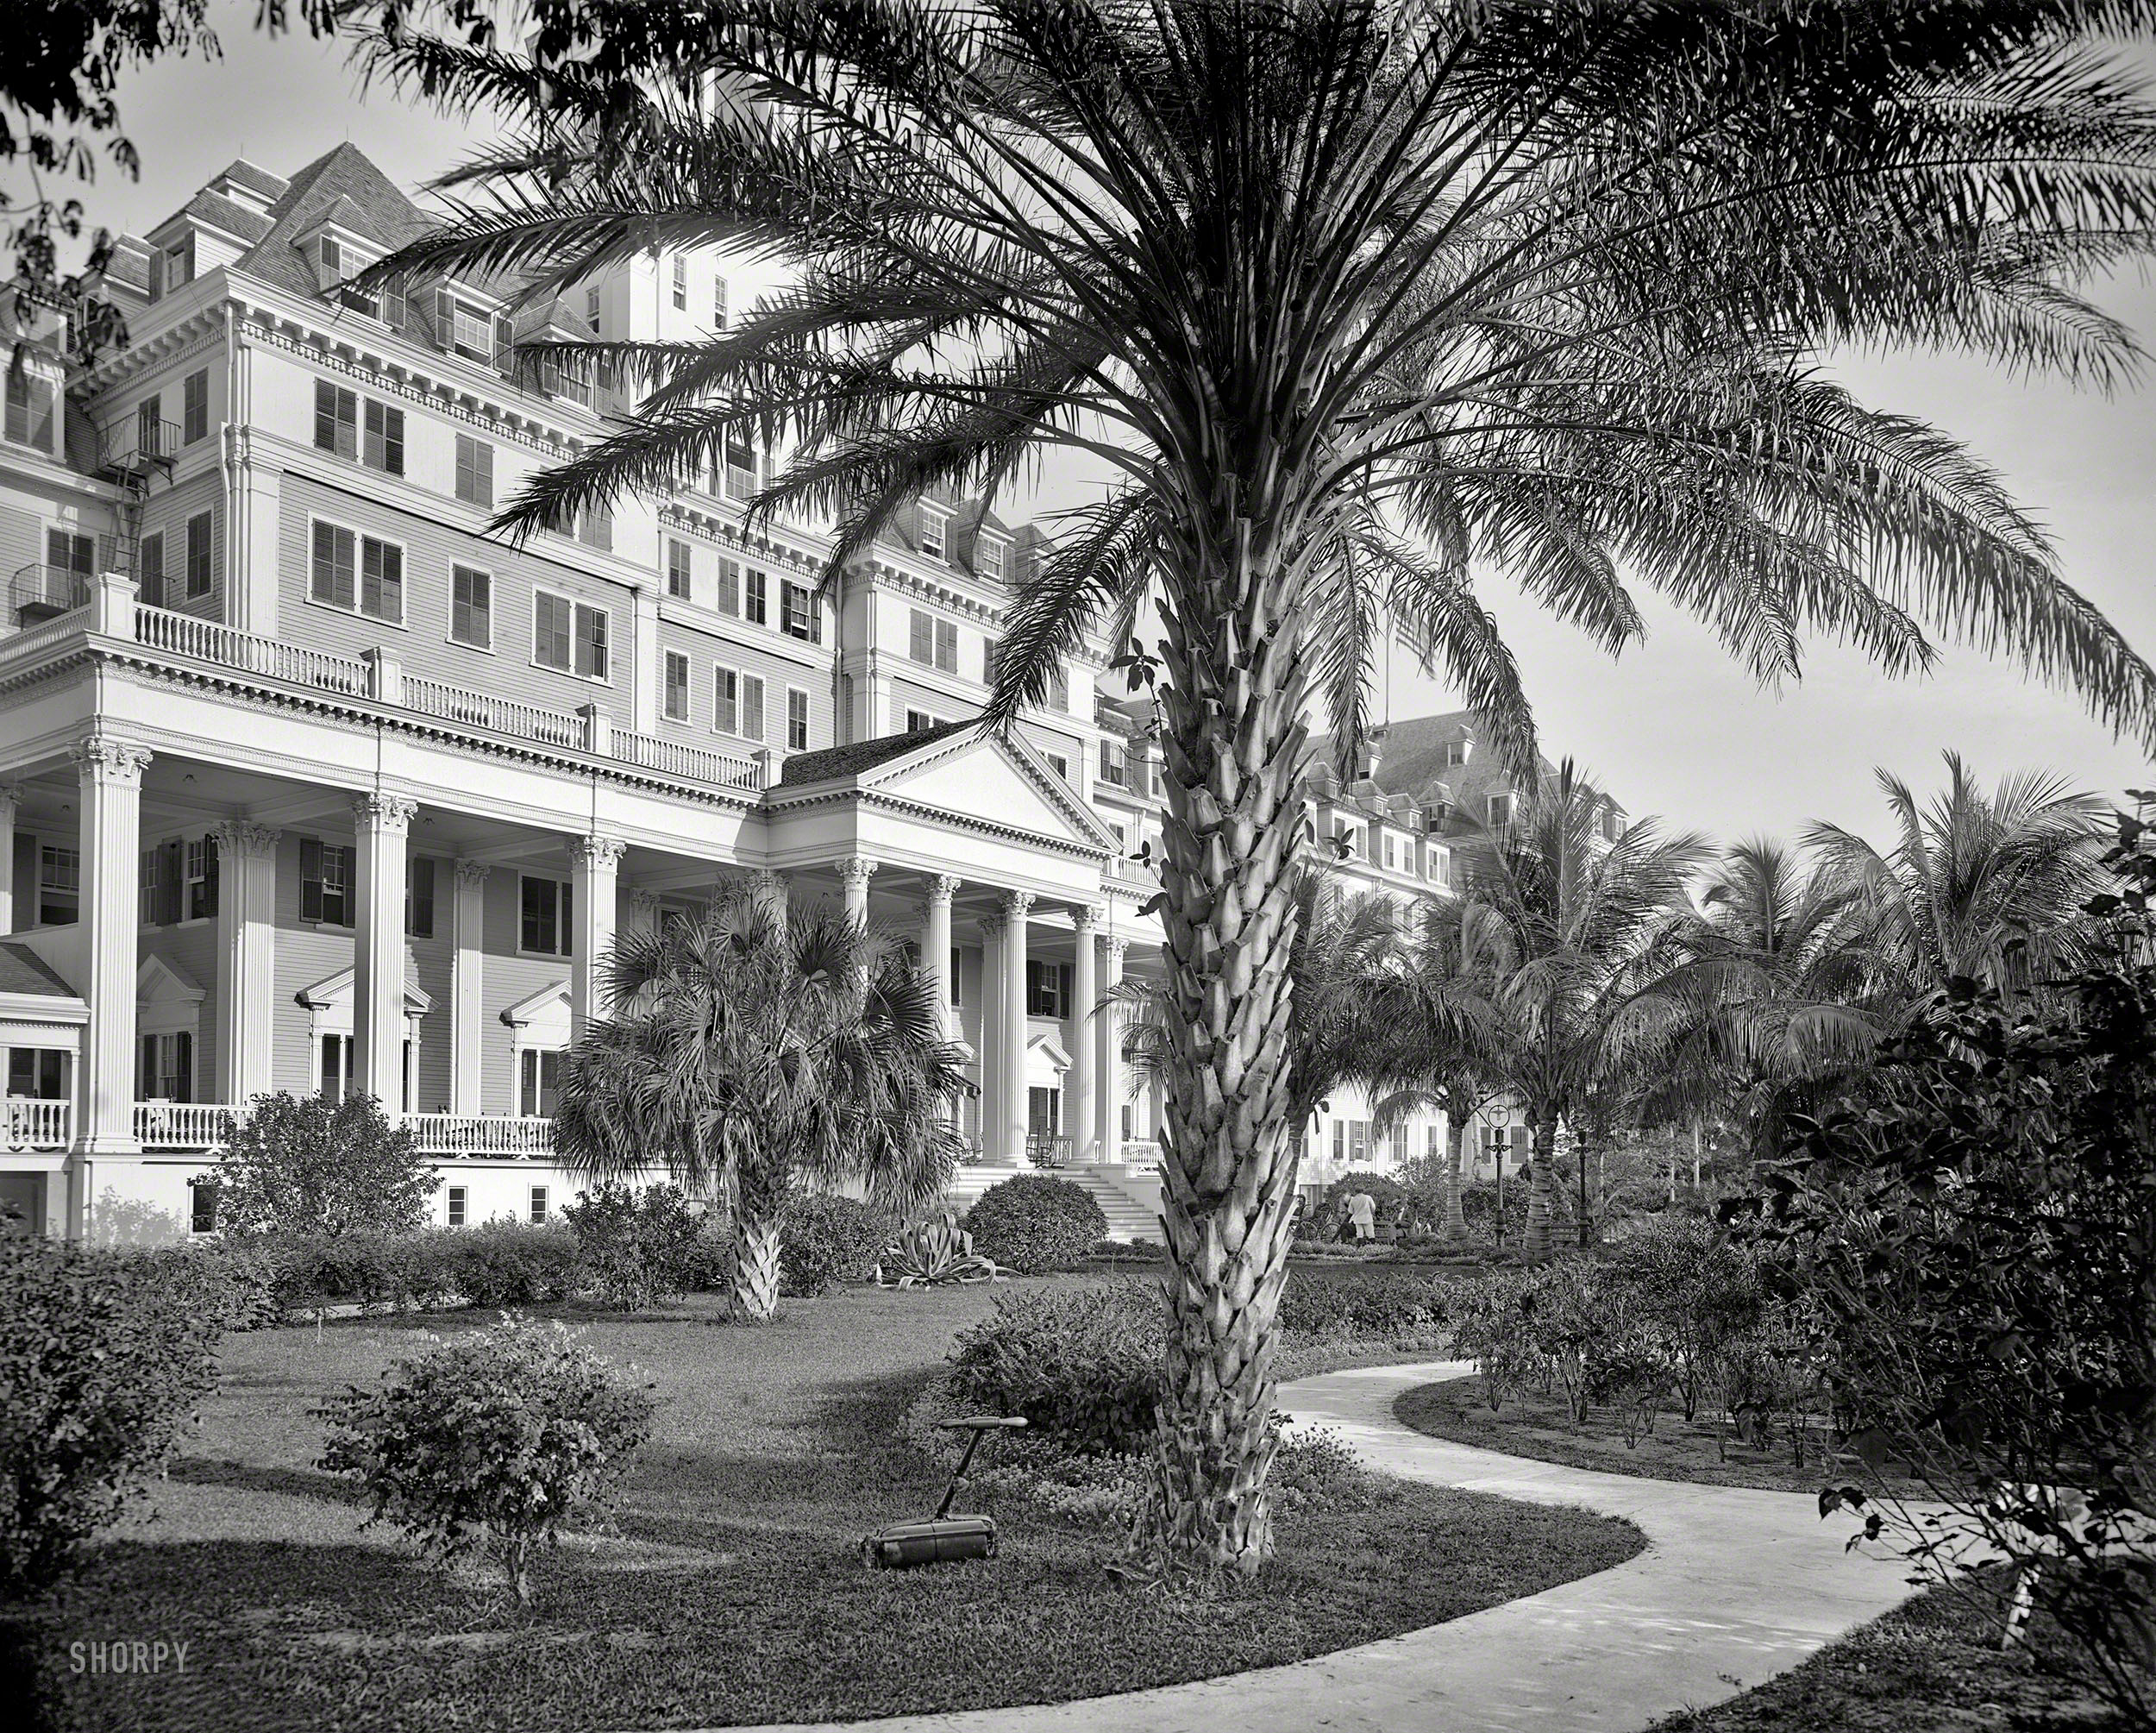 Palm Beach in 1902. "Royal Poinciana Hotel, entrance." 8x10 glass negative by William Henry Jackson, Detroit Photographic Company. View full size.